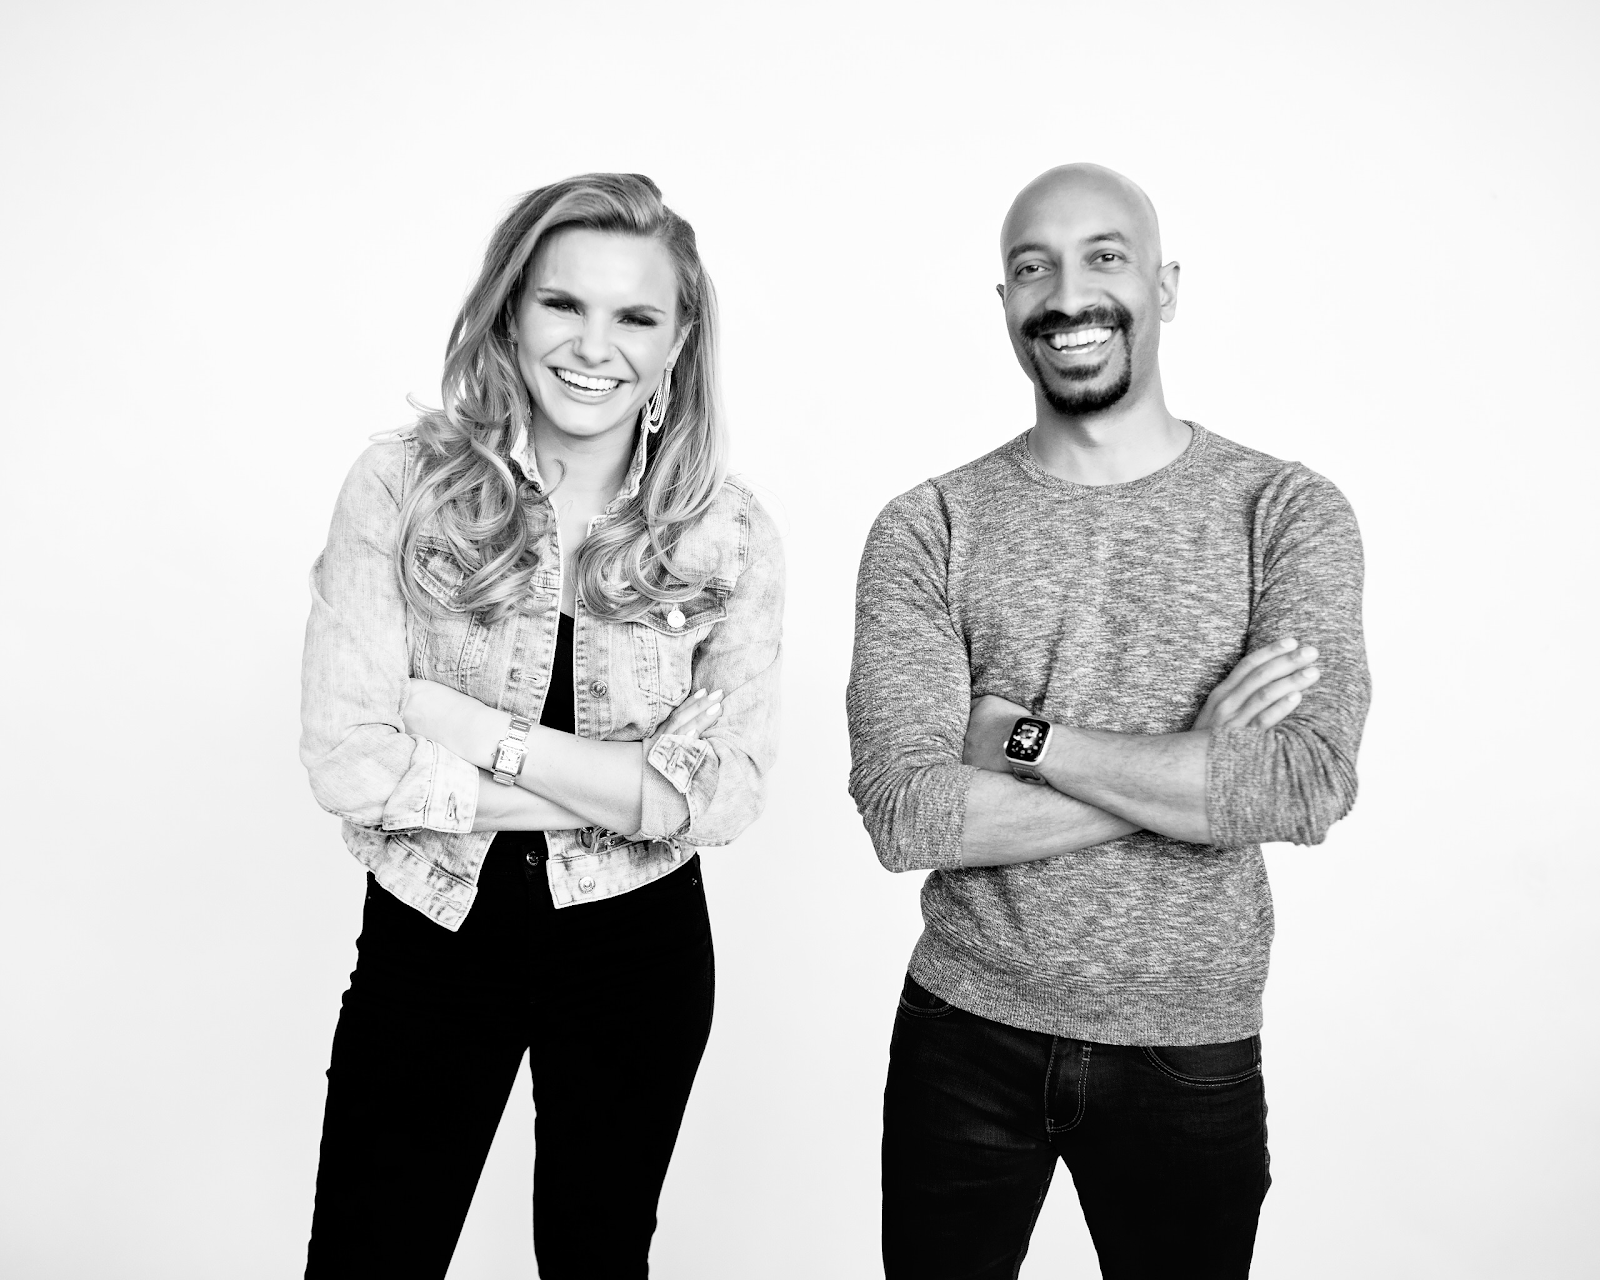 Michele Romanow and Andrew D'Souza of Clearbanc